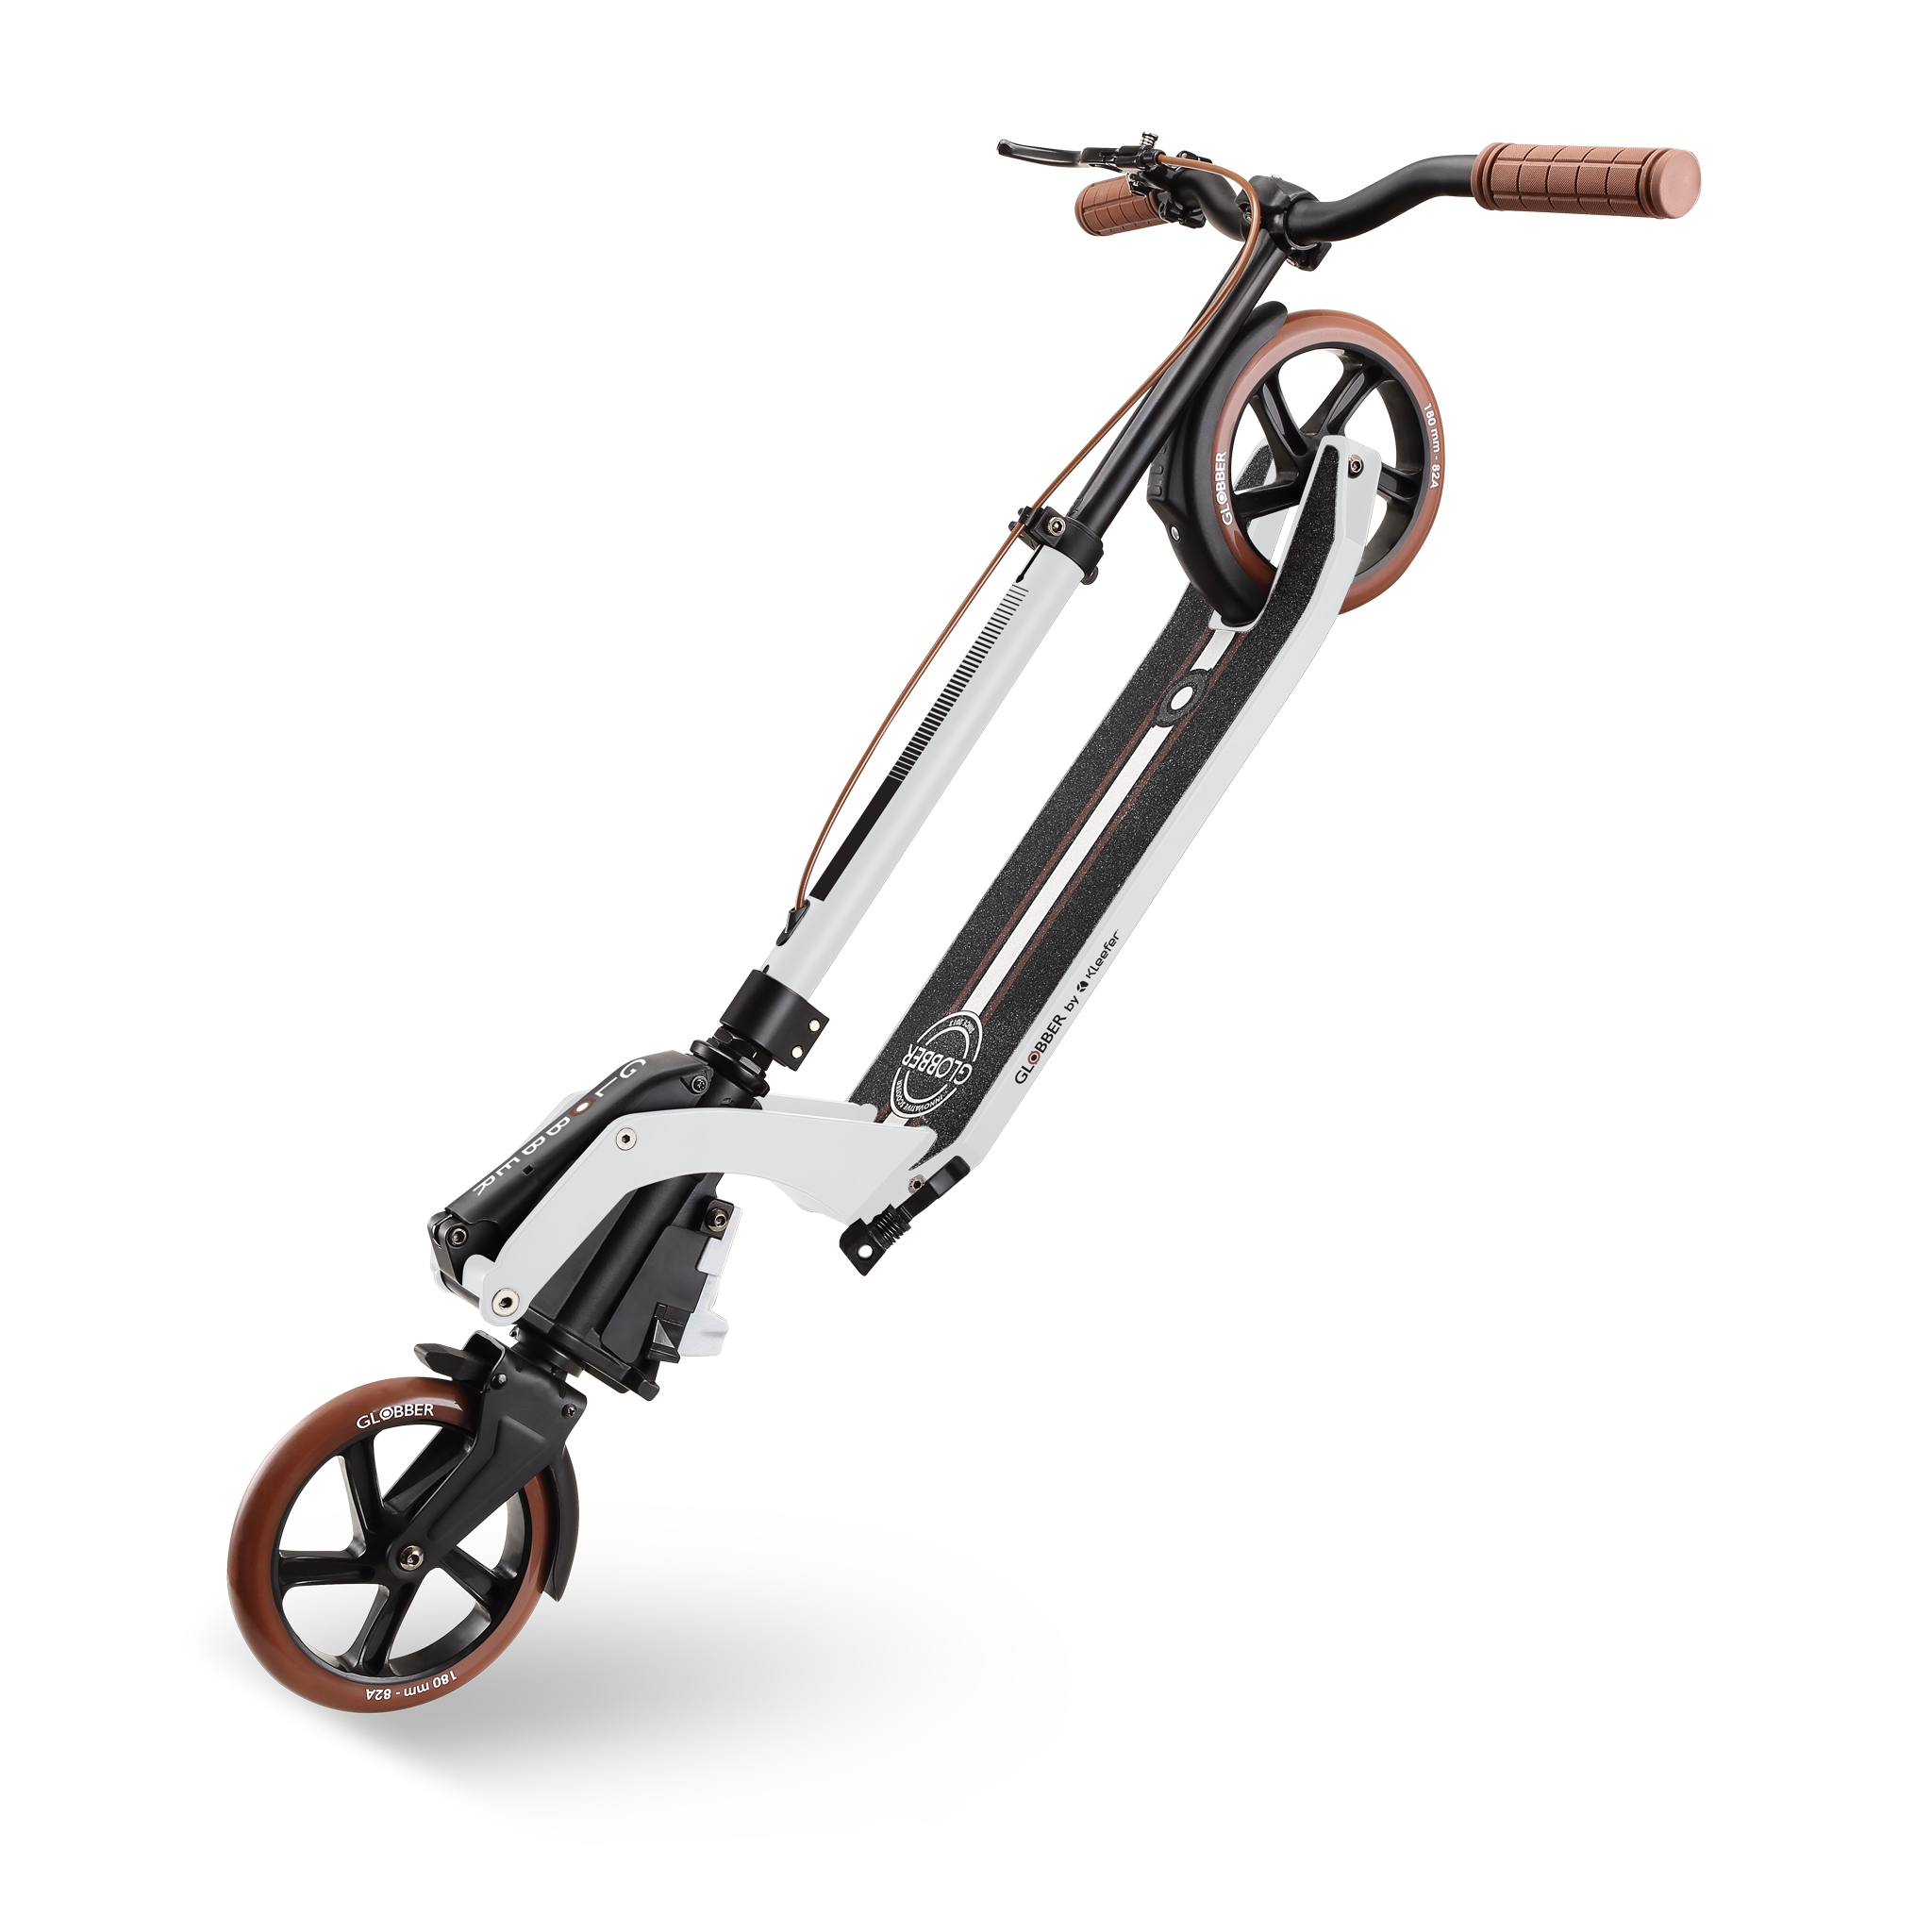 ONE-K-180-PISTON-DELUXE-foldable-kick-scooter-for-adults 1